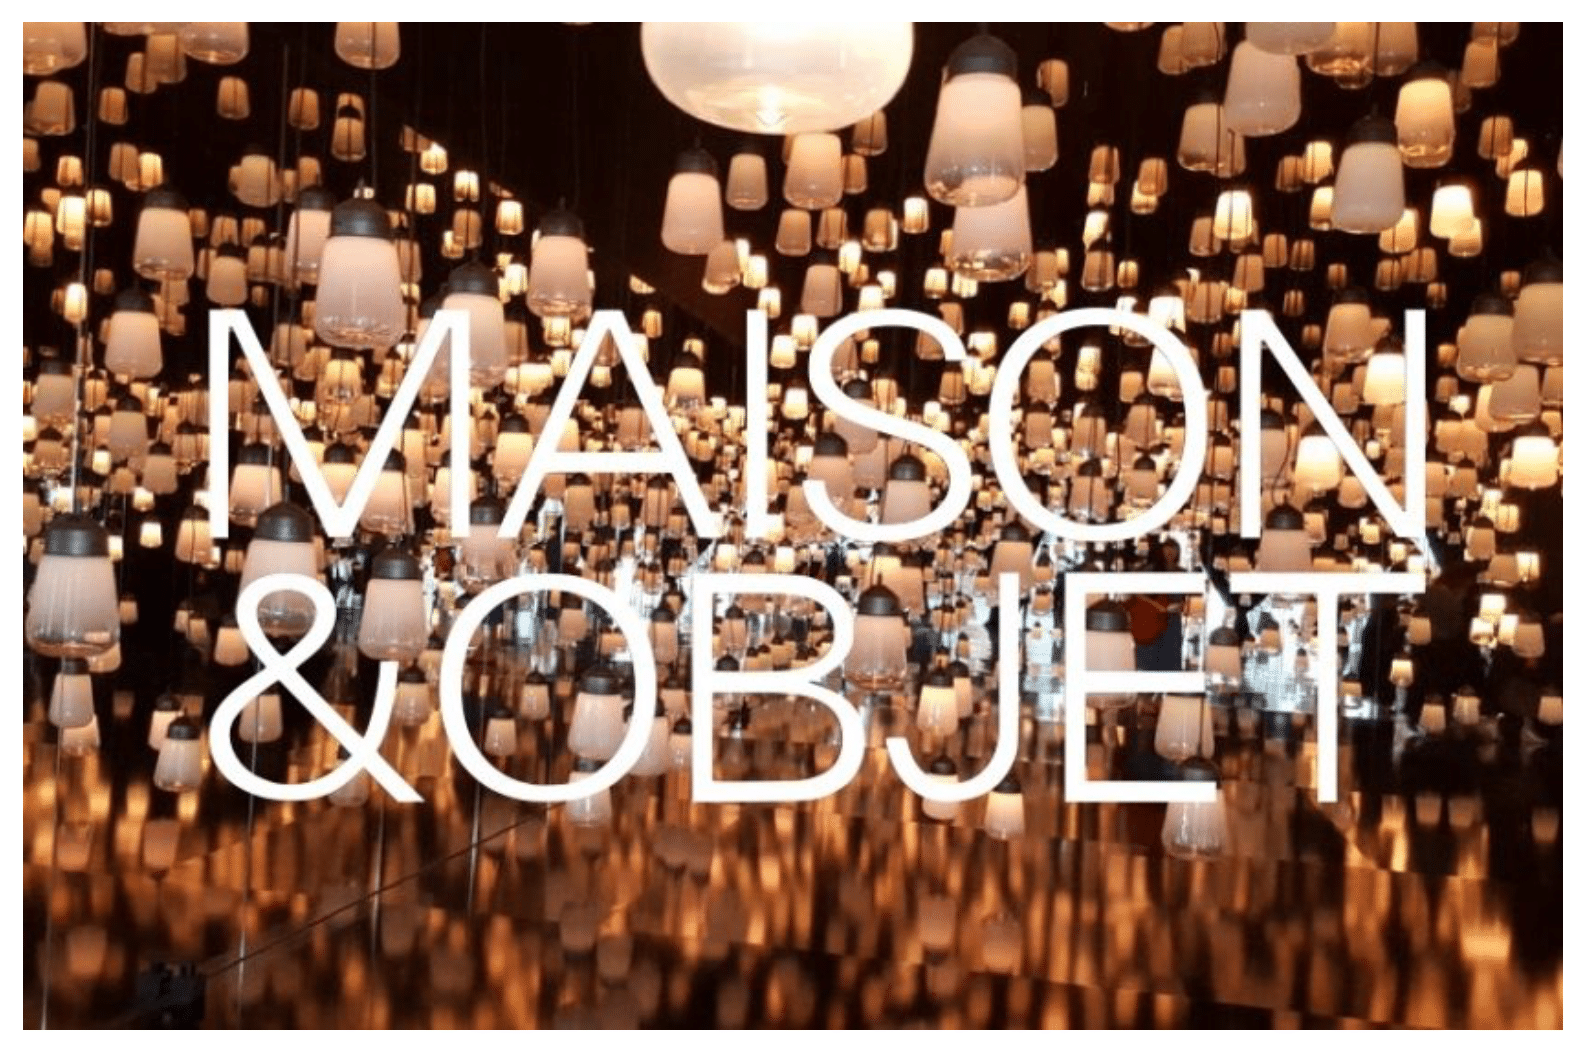 Maison&Objet: congress of professional artists and designers that can’t be missed